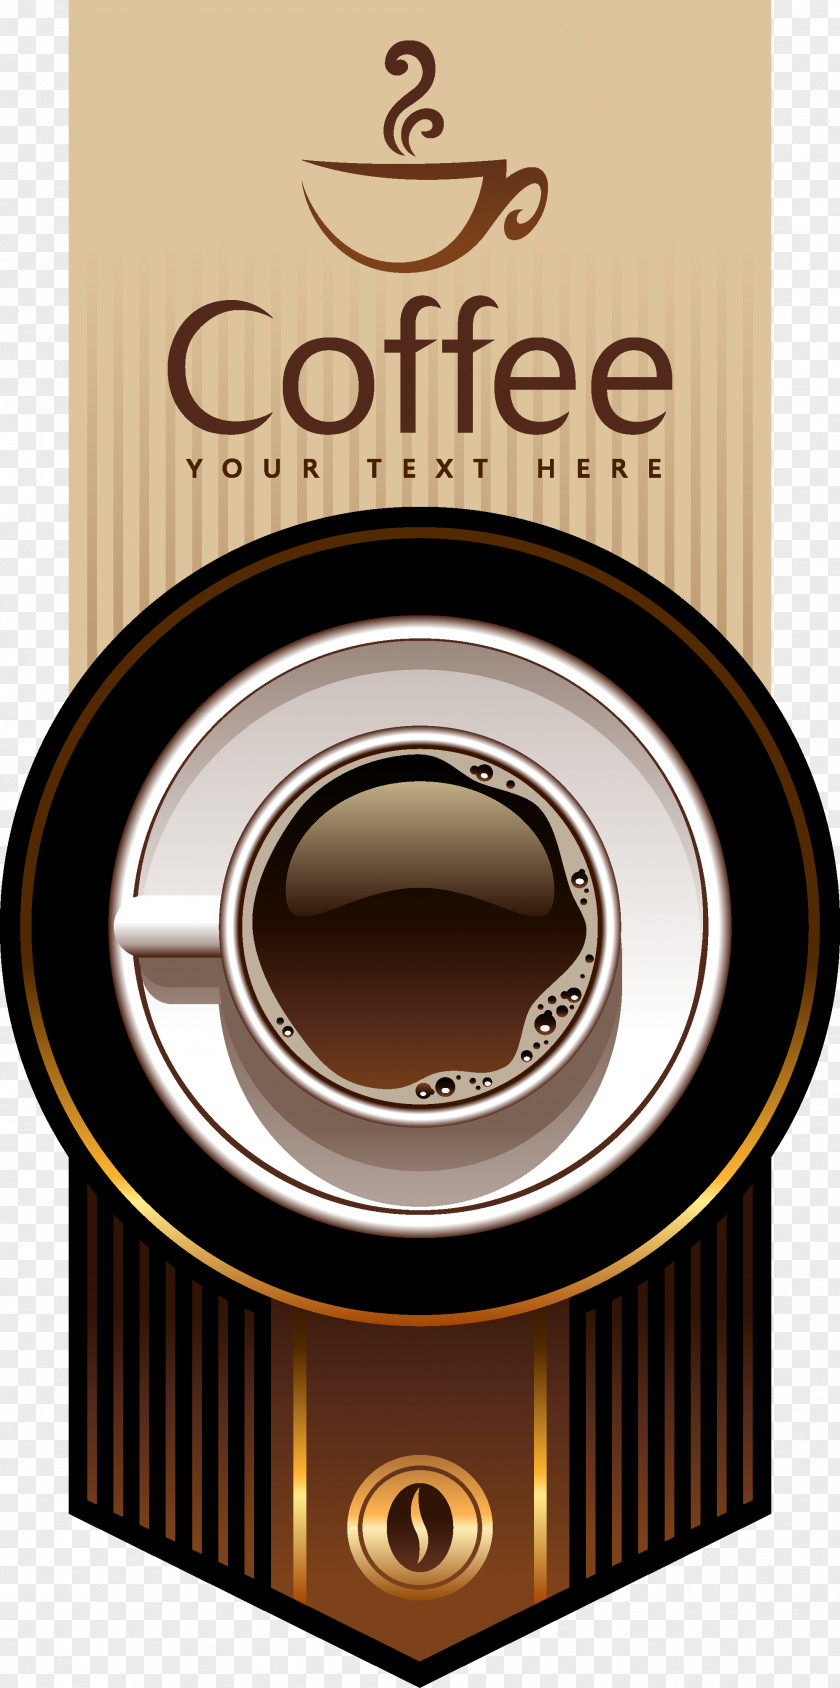 Coffee Beans Cafe Instant Menu PNG